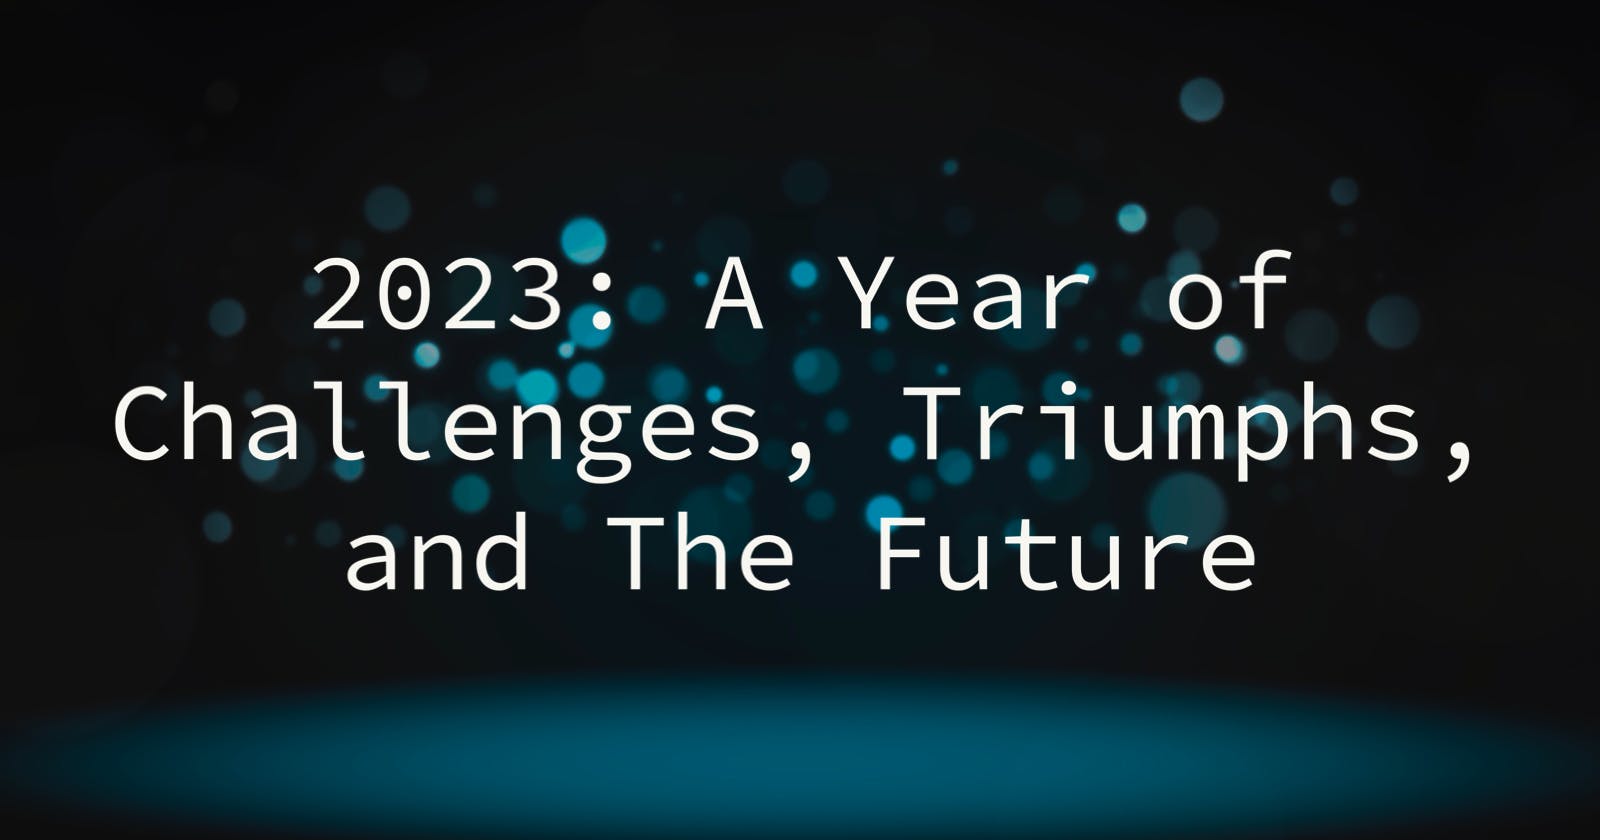 2023: A Year of Challenges, Triumphs, and The Future